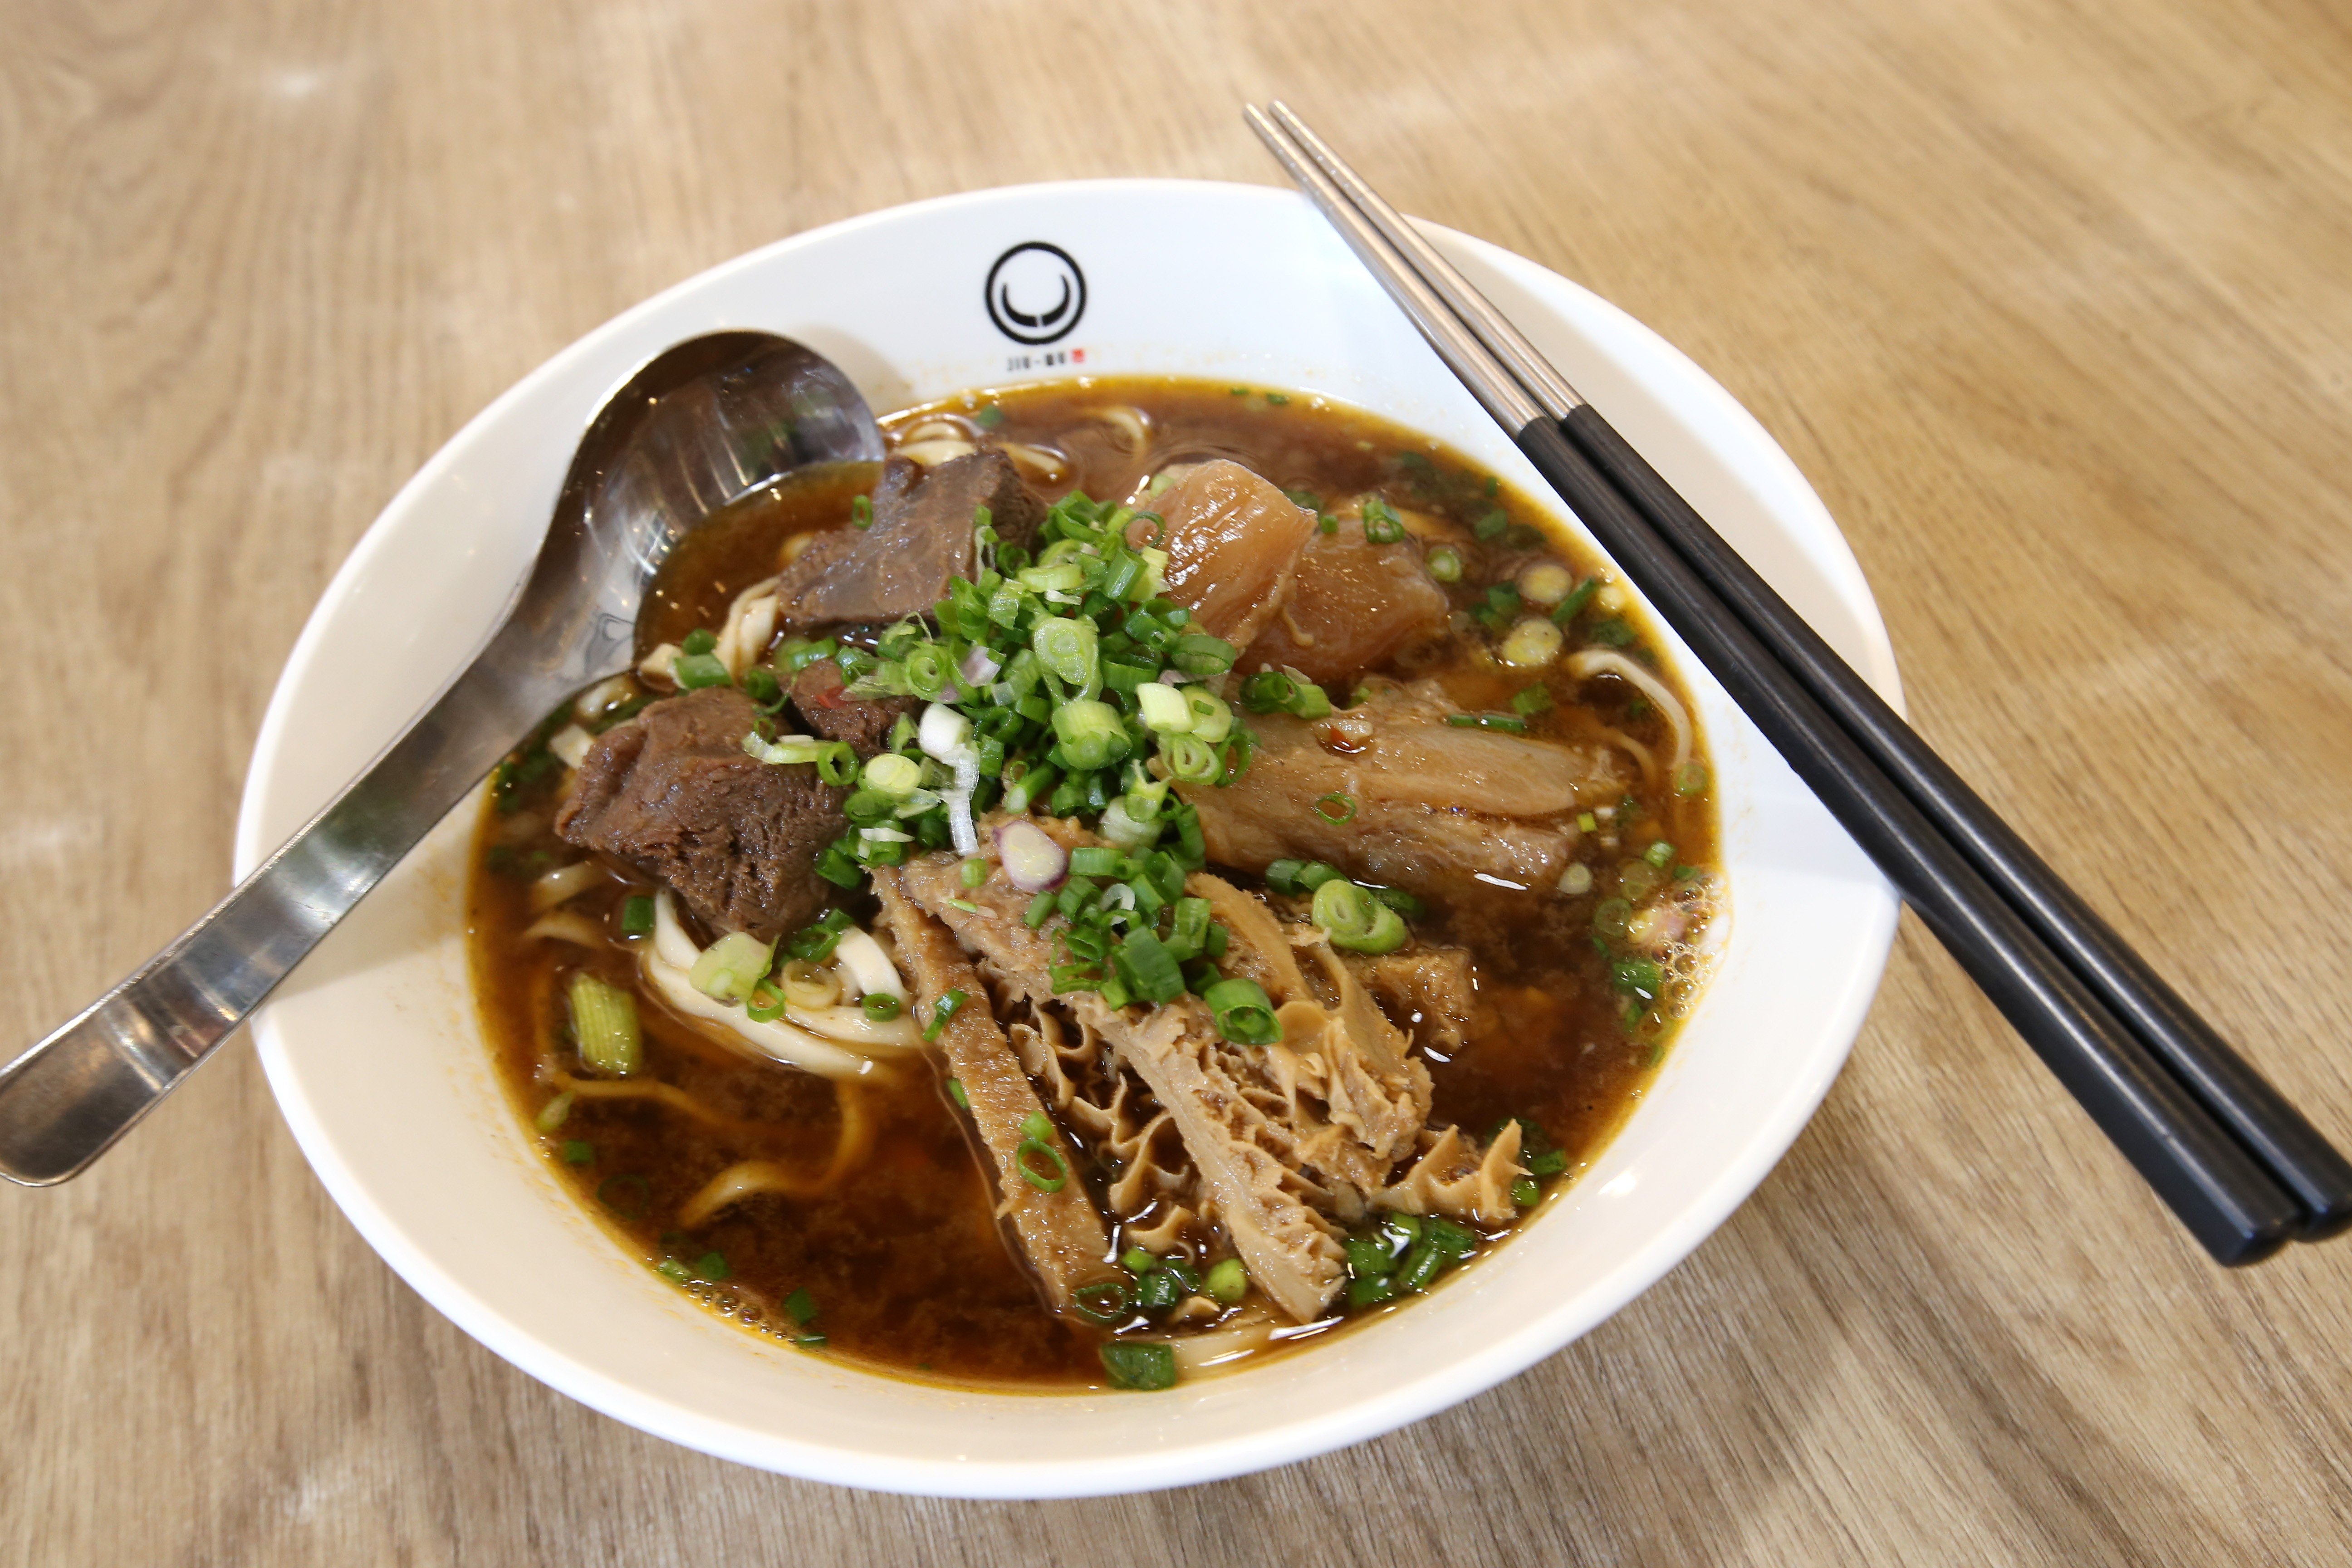 Taiwanese beef noodle soup with meat, tendon and tripe at Jiu-Wu Beef Noodles in Causeway Bay, Hong Kong. Photo: David Wong